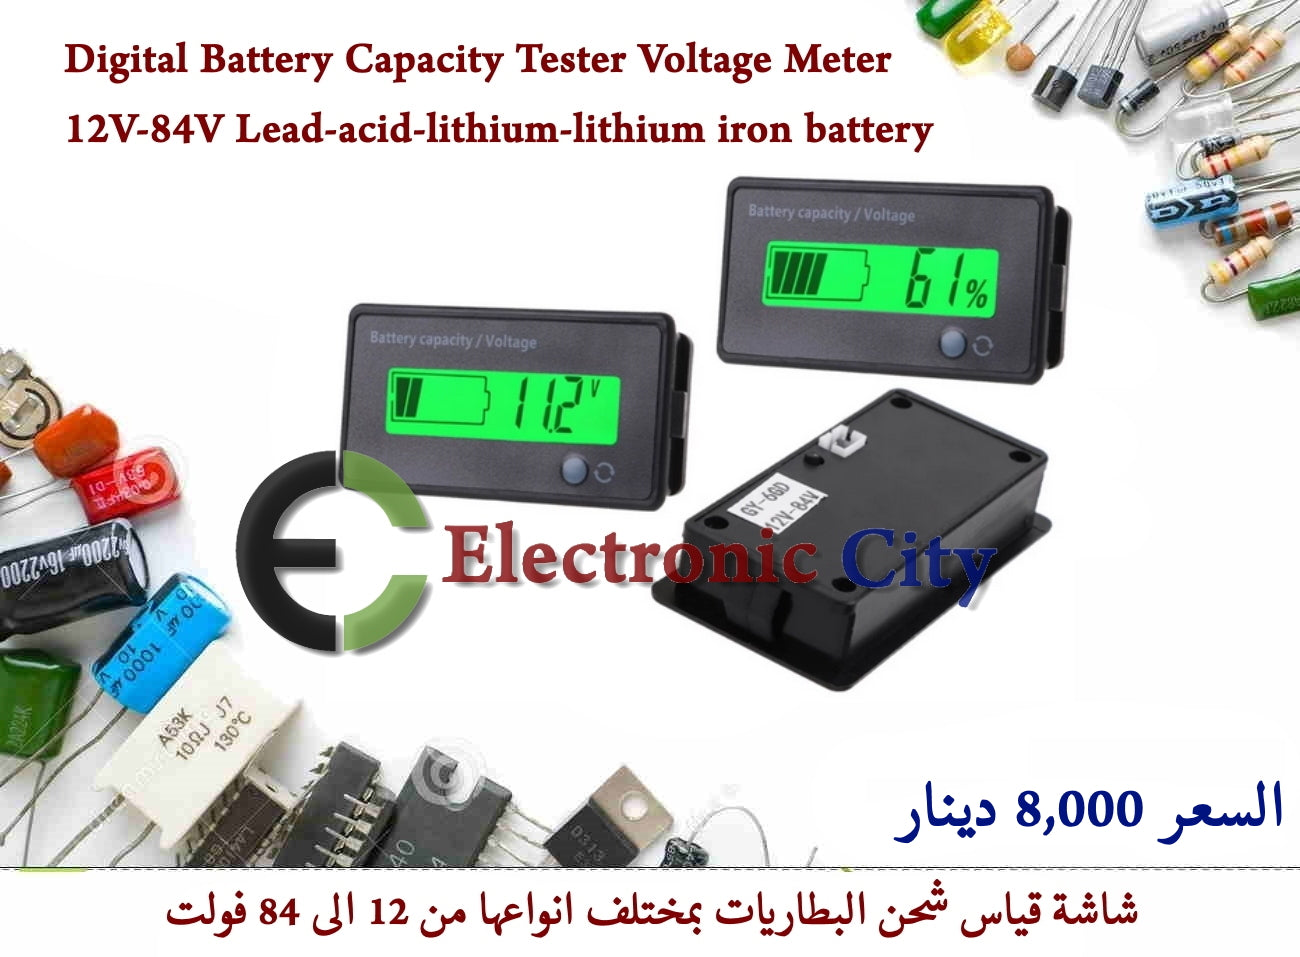 Digital Battery Capacity Tester Voltage Meter 12V-84V Lead-acid-lithium-lithium iron battery #E10 X-0040A